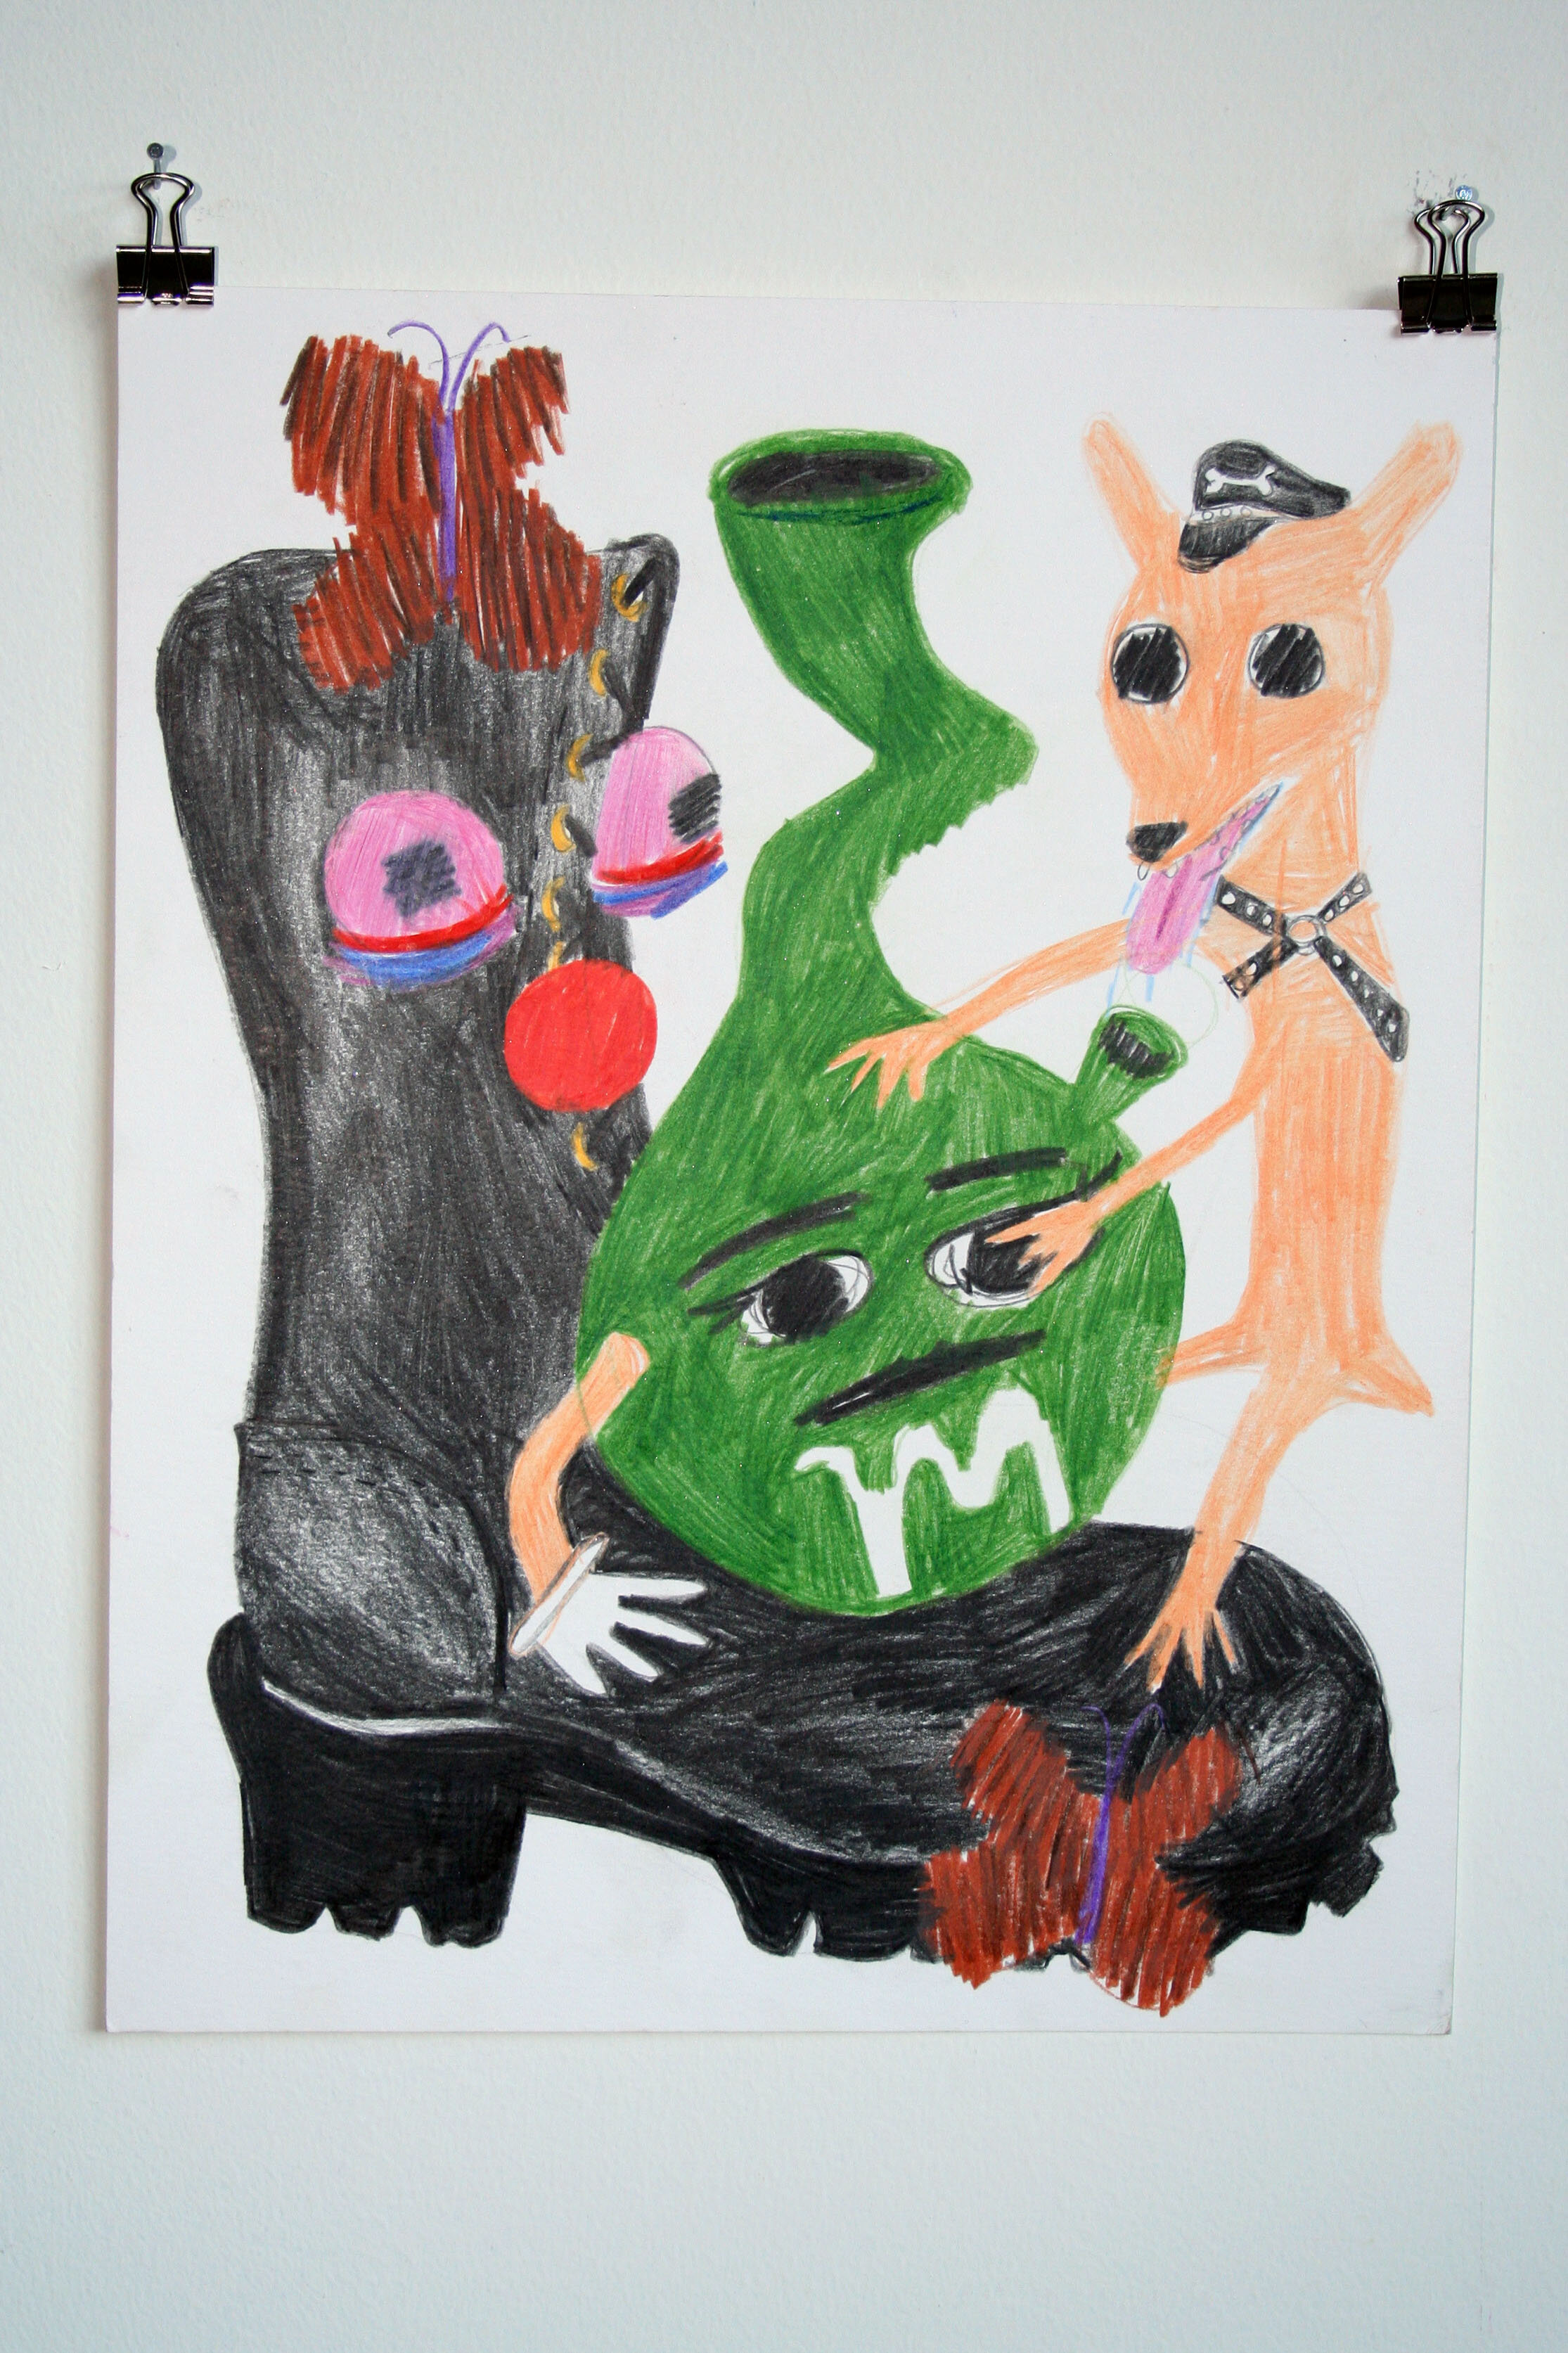   Bootlicker and His Ms. Green Bong,  2013  14 x 11 inches (35.56 x 27.94 cm.)  Colored pencil on paper  Private collection 